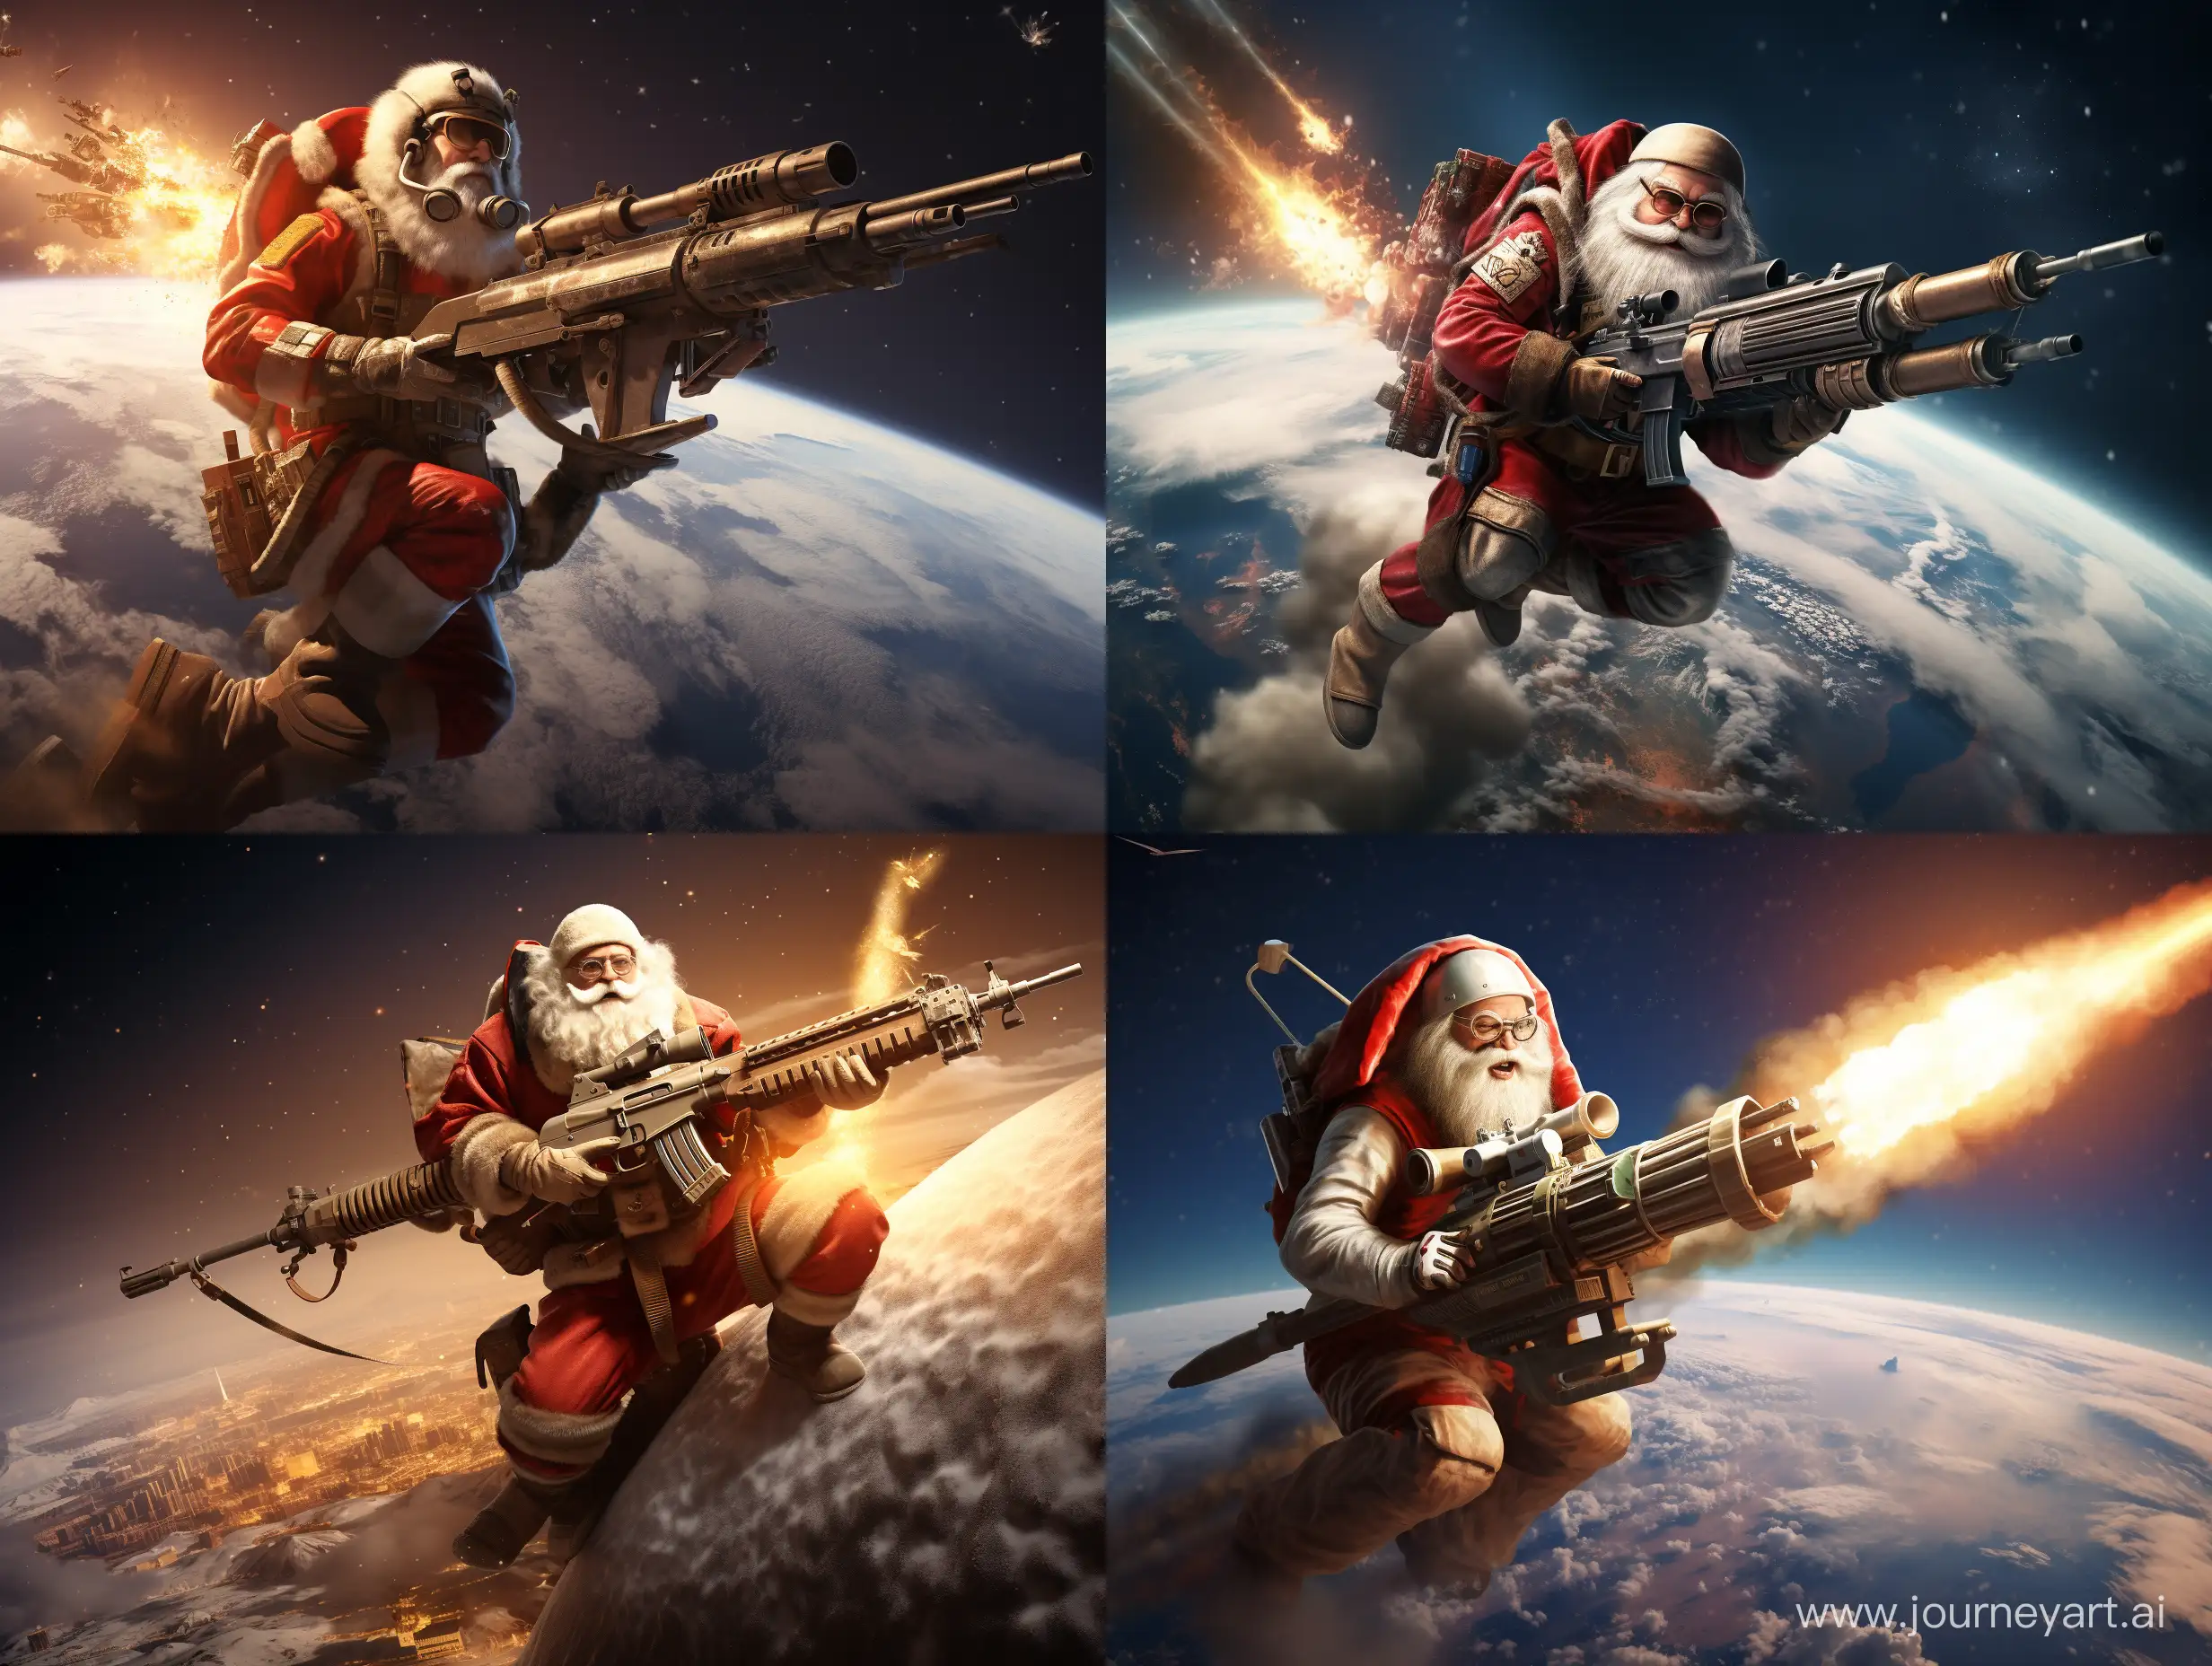 Santa-Soaring-Over-Earth-on-a-Festive-Mission-with-AK47